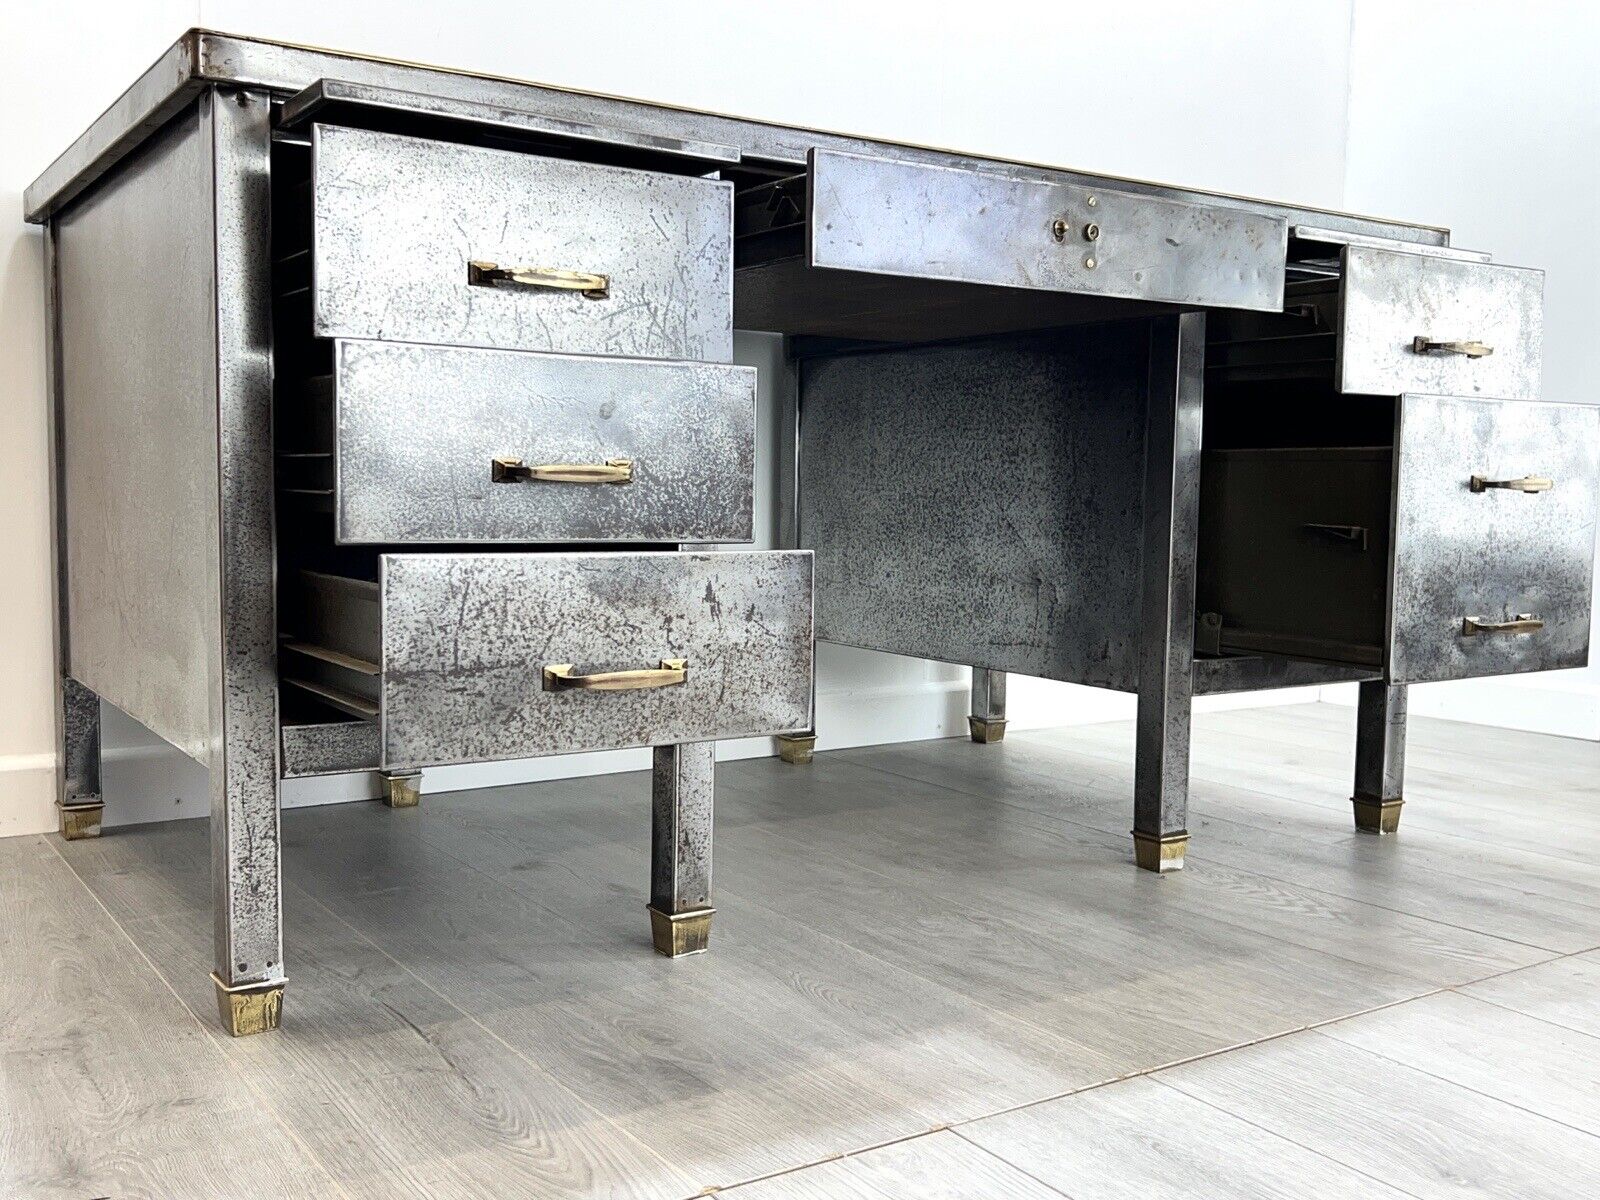 Steel, Brass and Leather Topped Double Pedestal Industrial Desk